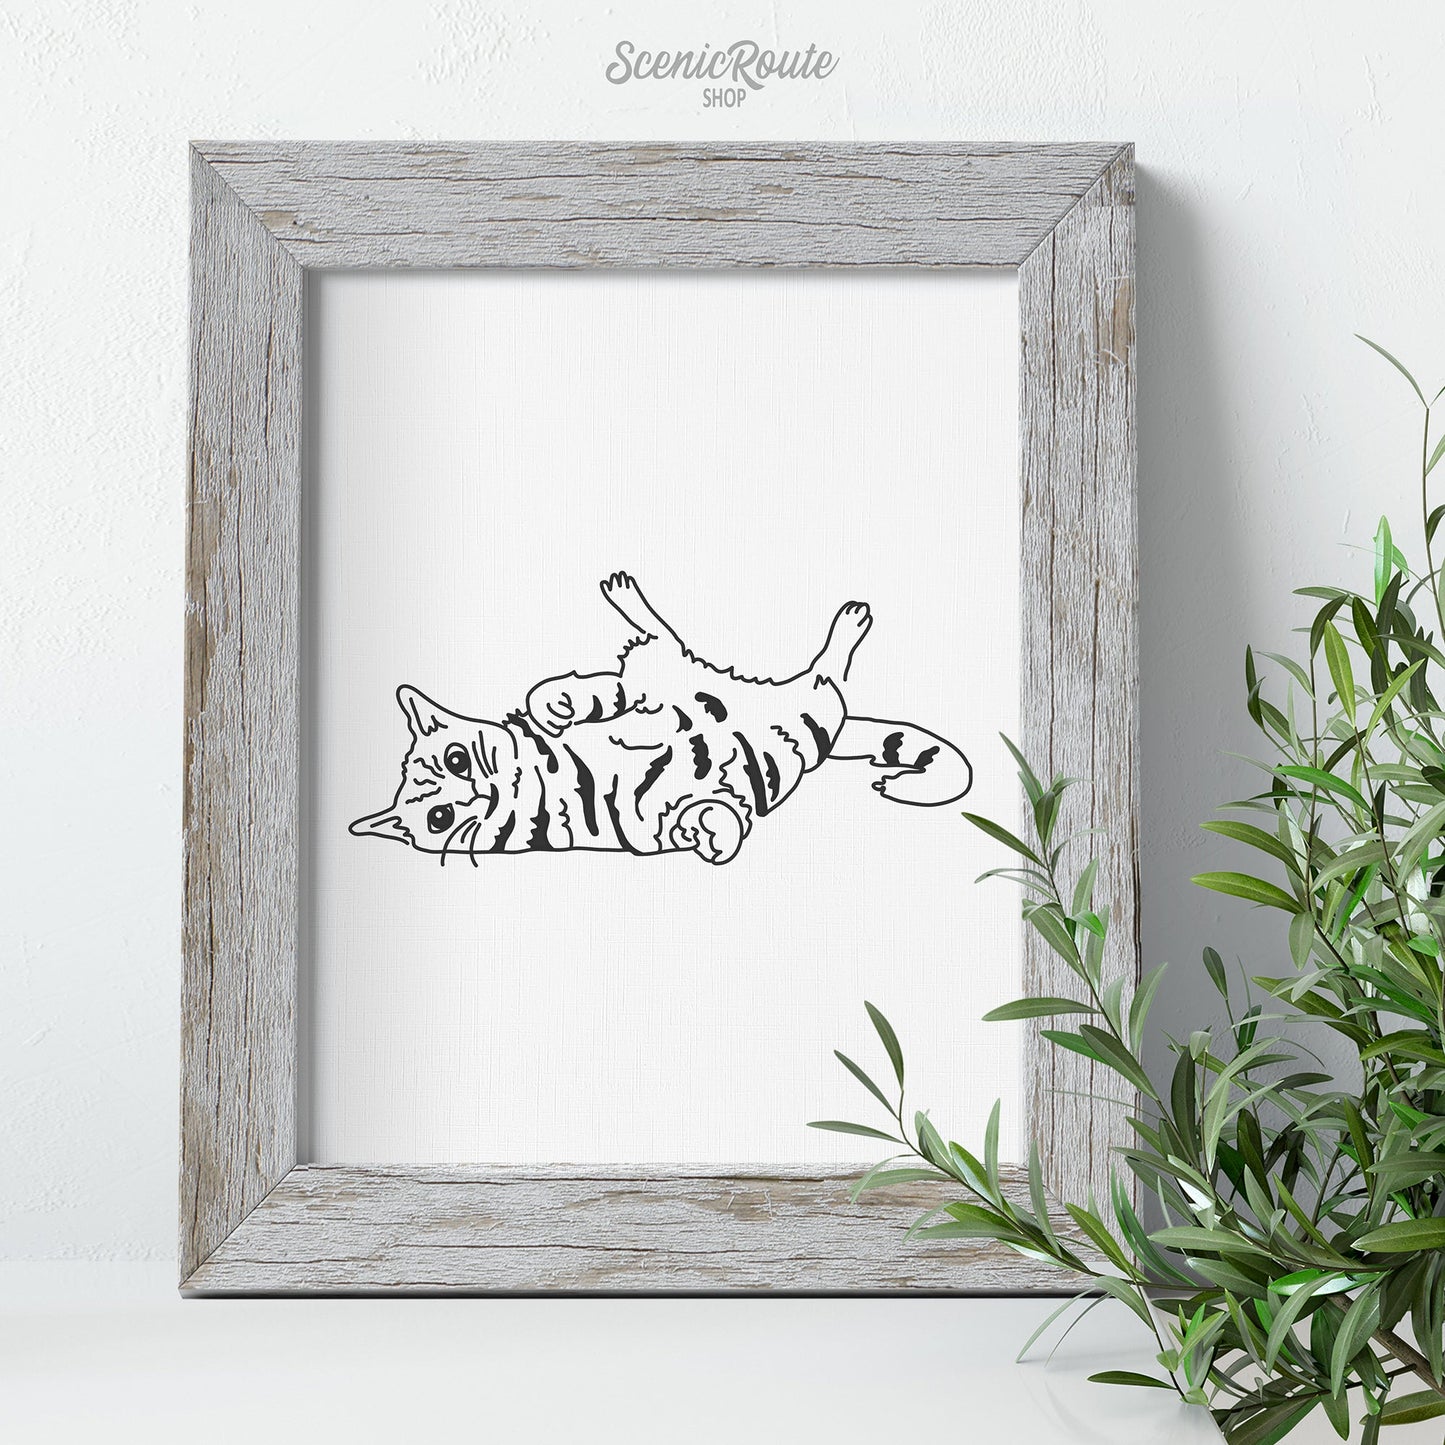 A framed line art drawing of a Playful Cat with a plant